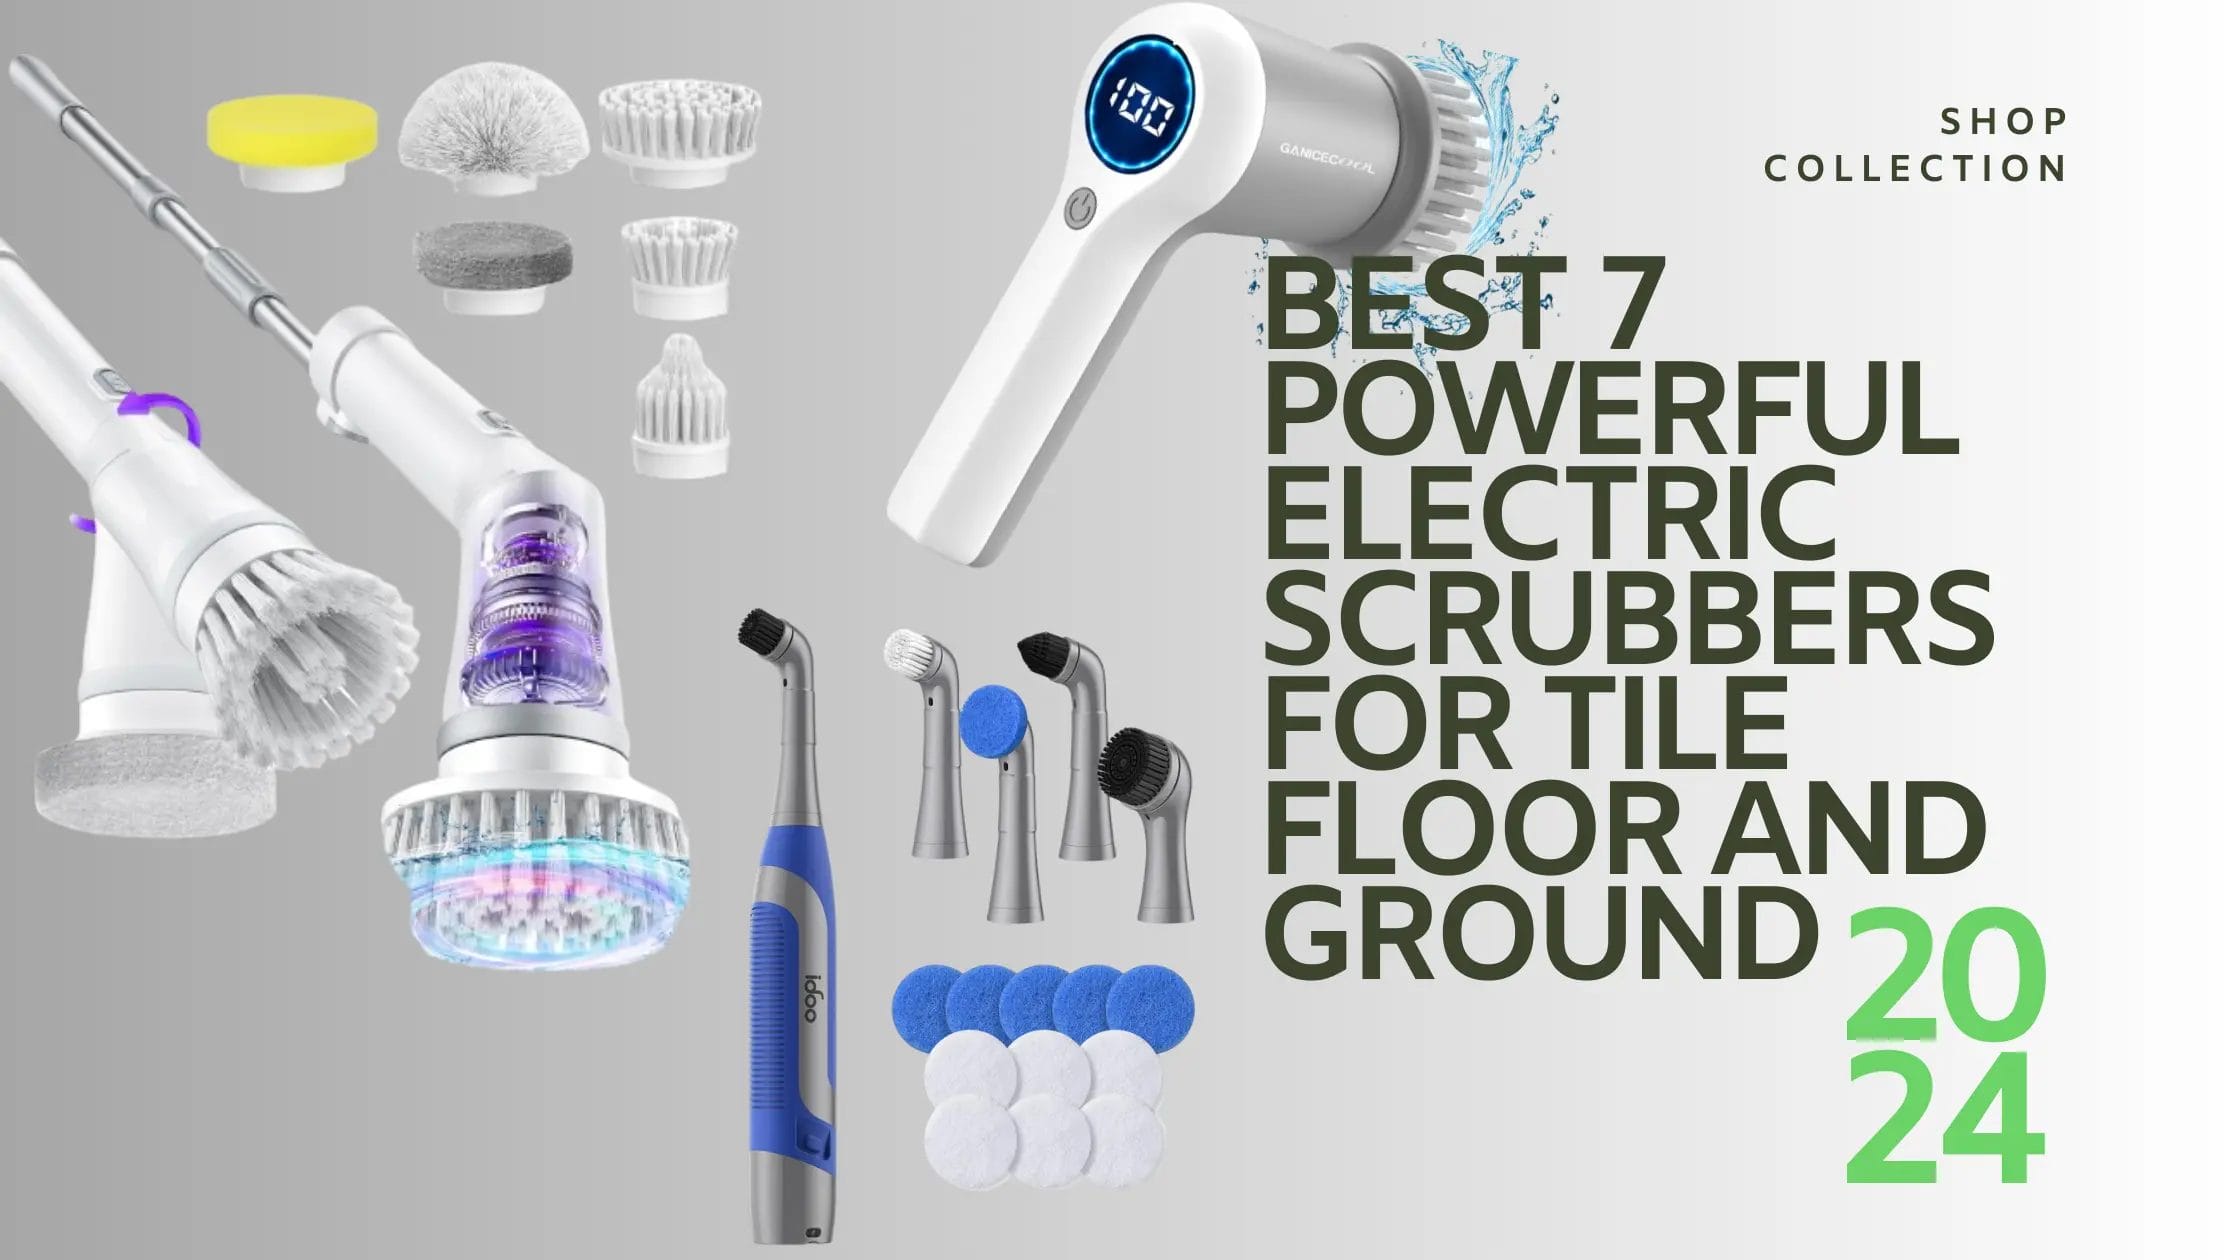 Best powerful electric Scrubbers for Tile Floor